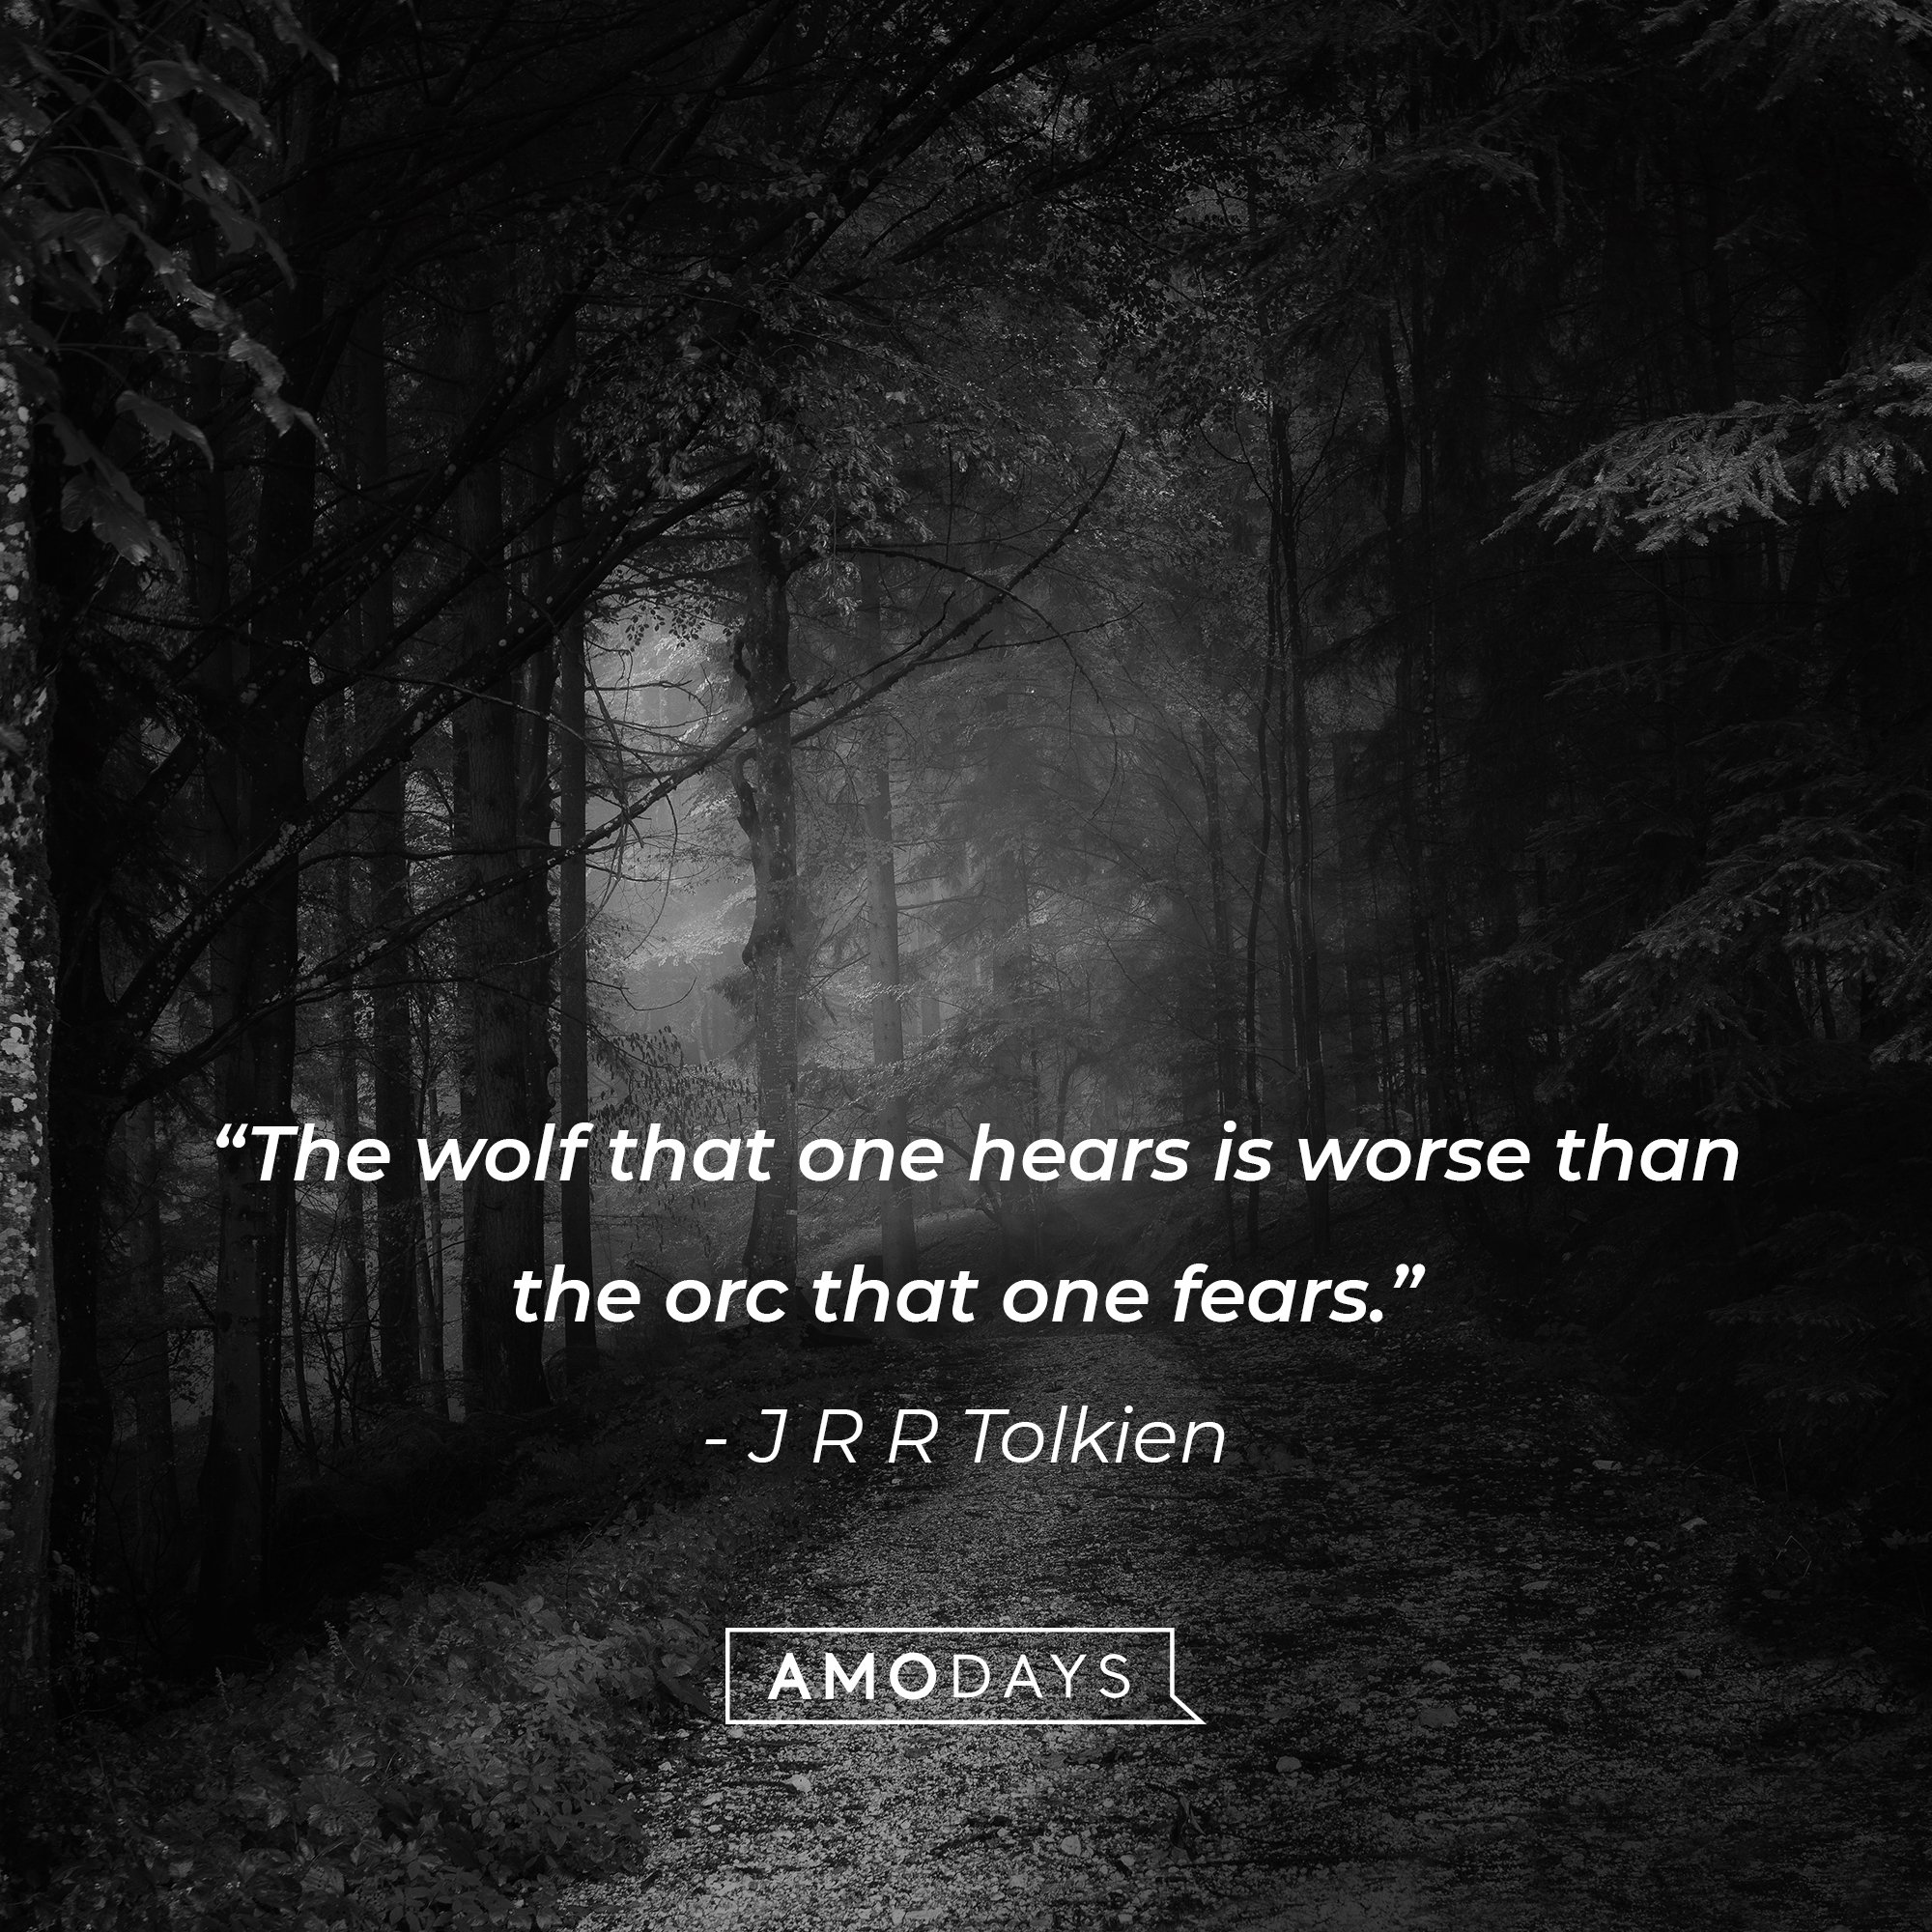 J R R Tolkien's quote: “The wolf that one hears is worse than the orc that one fears.” | AmoDays